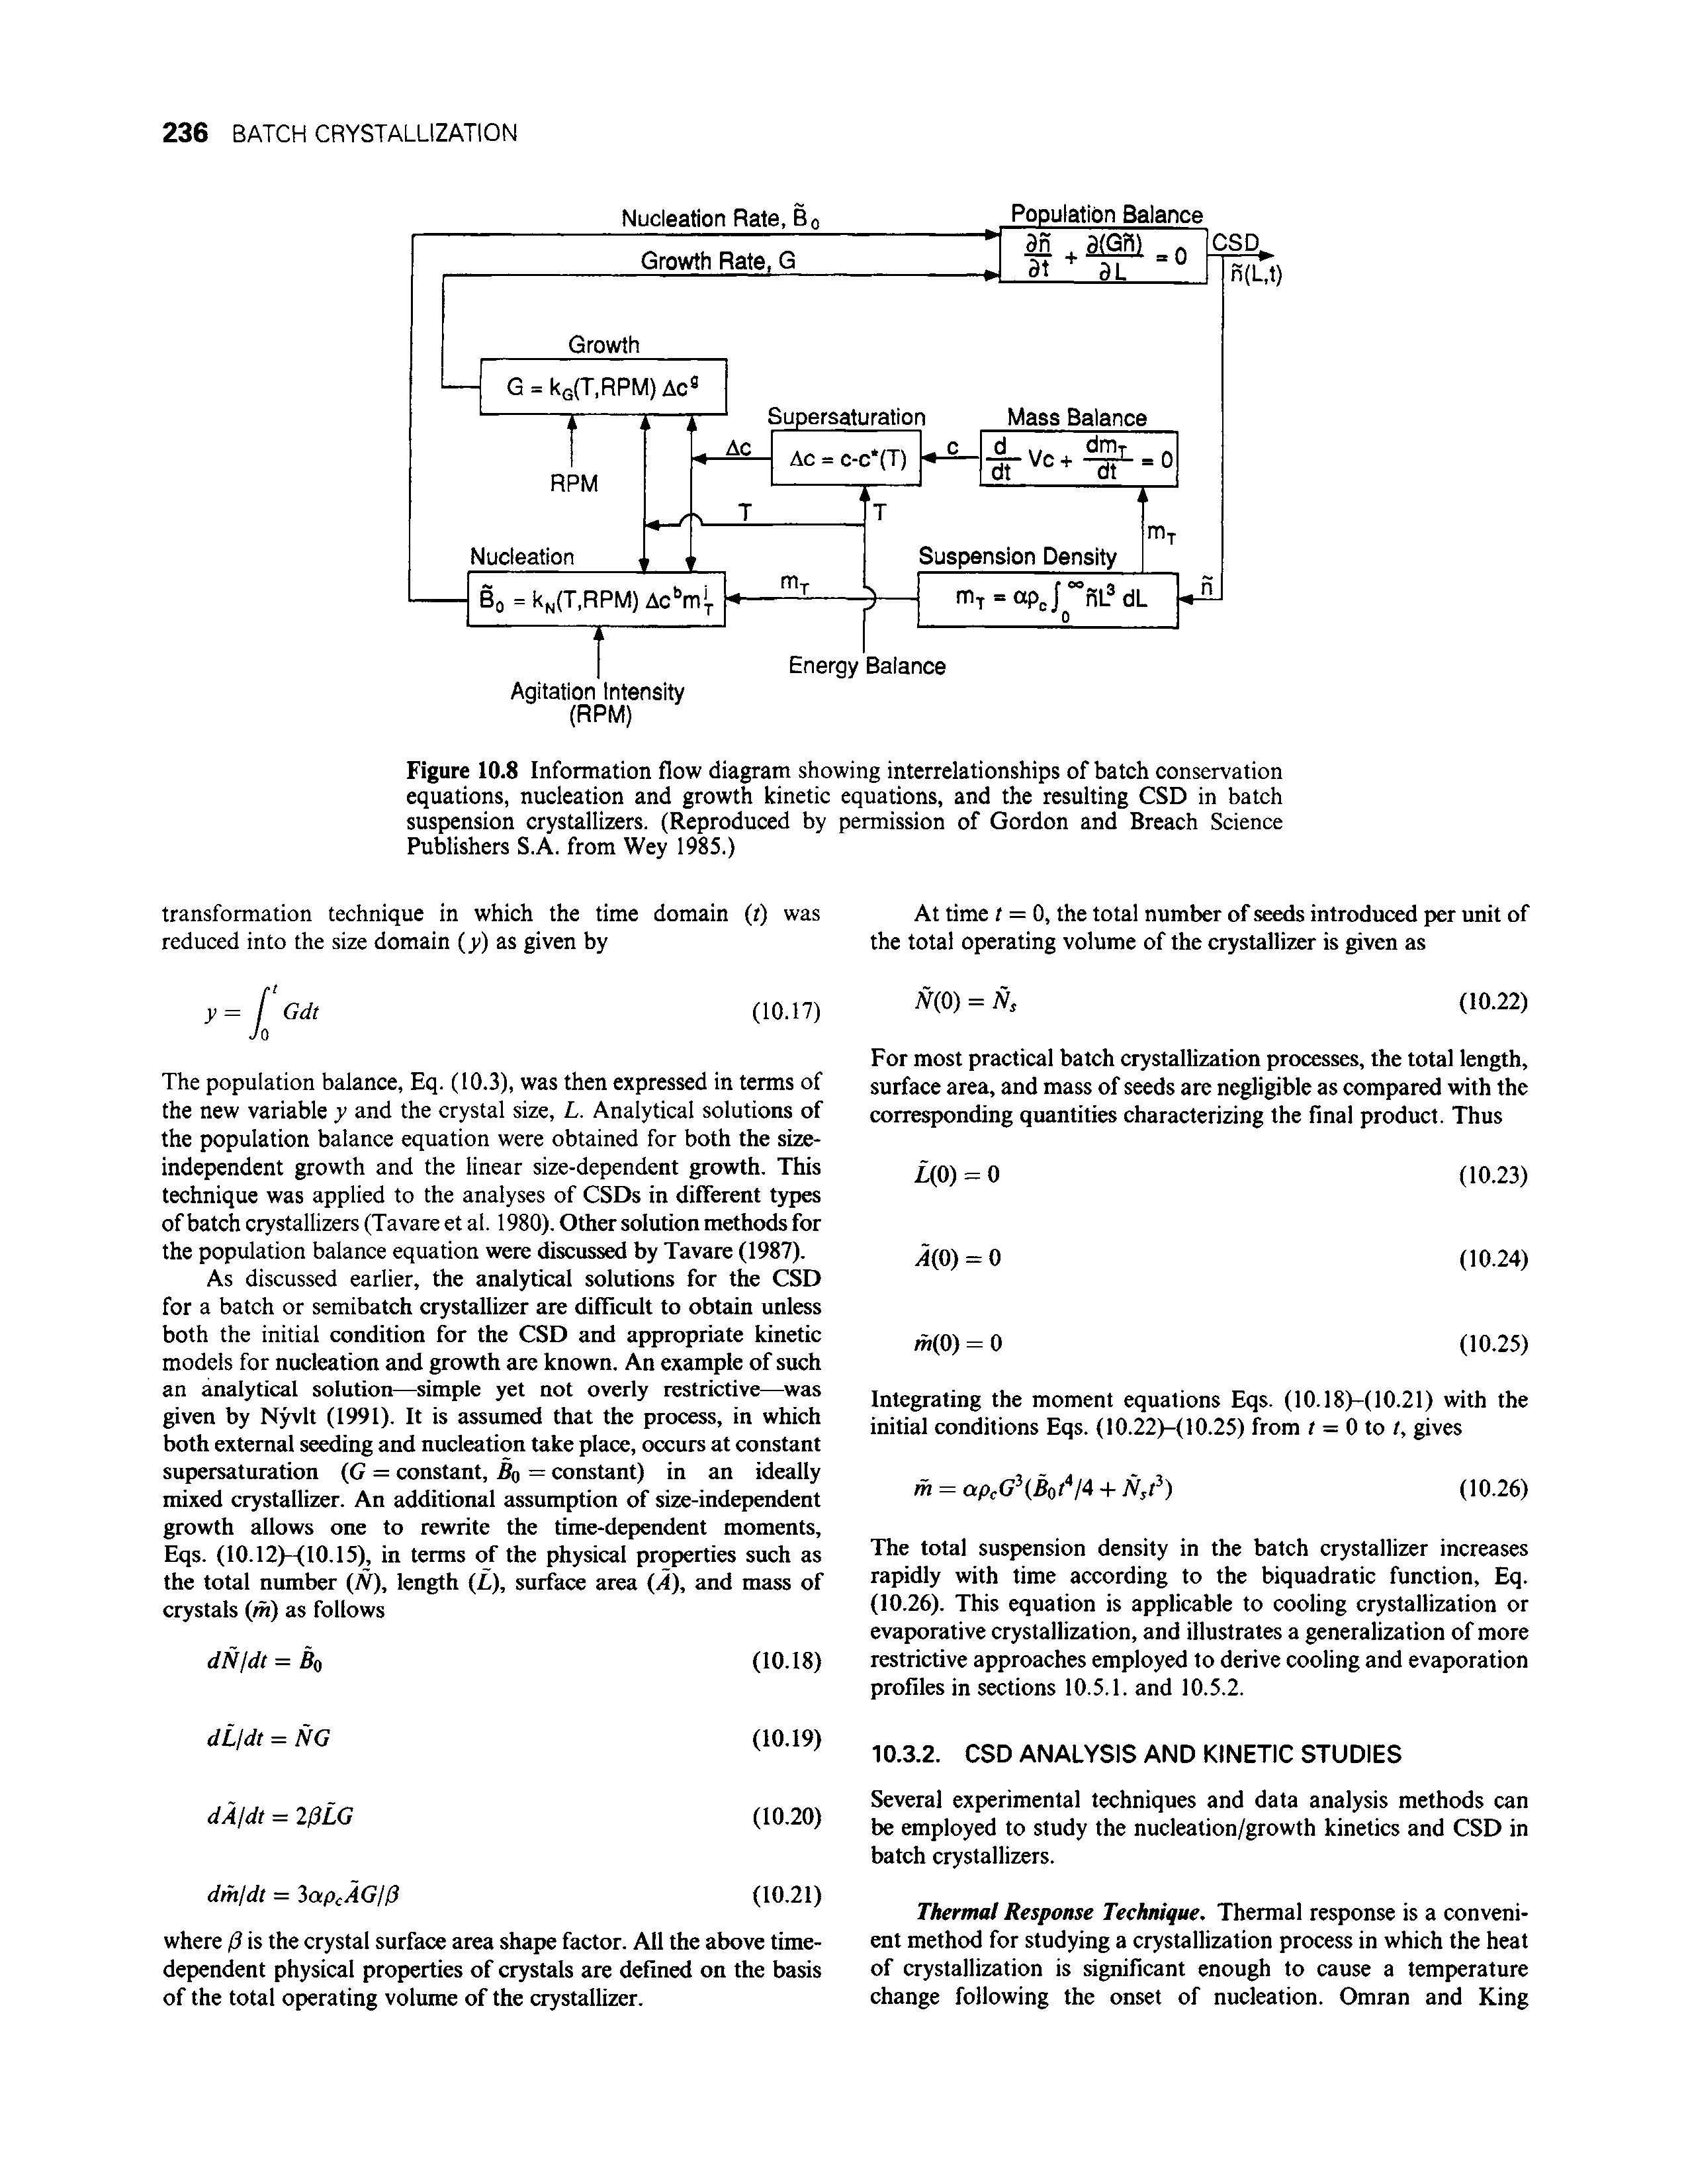 Figure 10.8 Information flow diagram showing interrelationships of batch conservation equations, nucleation and growth kinetic equations, and the resulting CSD in batch suspension crystallizers. (Reproduced by permission of Gordon and Breach Science Publishers S.A. from Wey 1985.)...